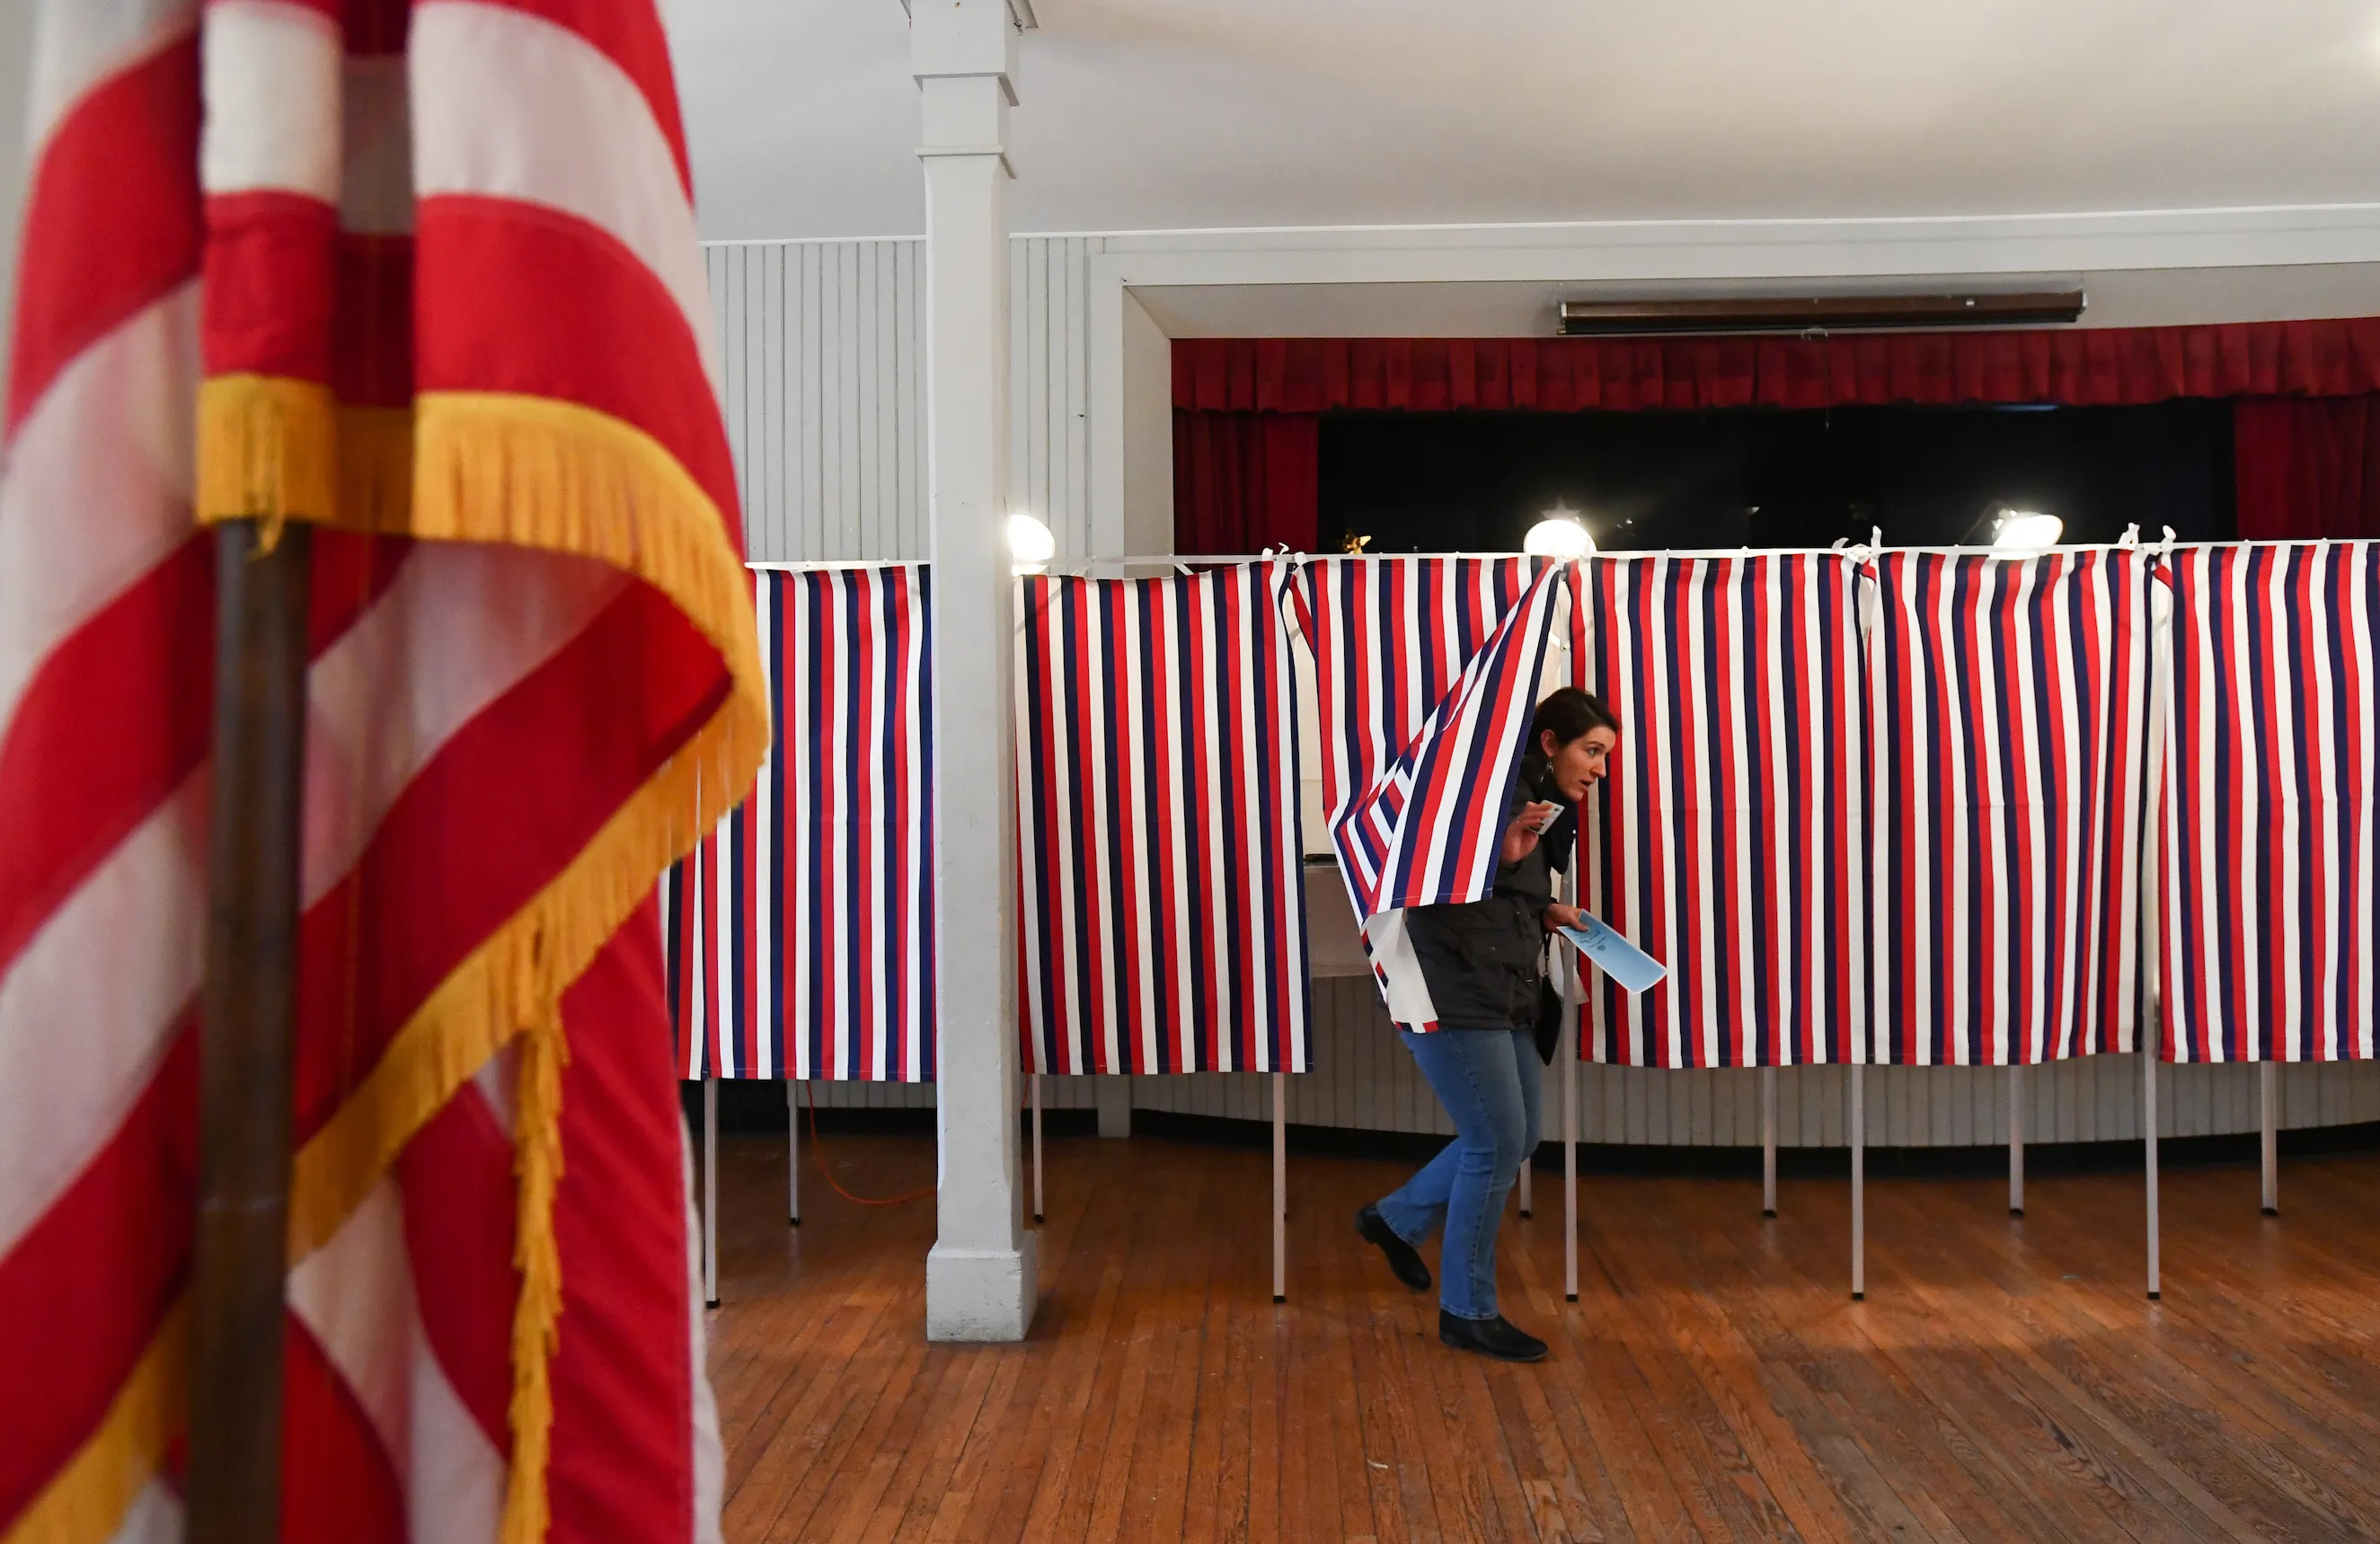 FILE PHOTO: A voter leaves a voting booth after casting her ballot in the state's presidential primary election in Greenfield, New Hampshire, U.S. February 11, 2020.    REUTERS/Gretchen Ertl/File Photo